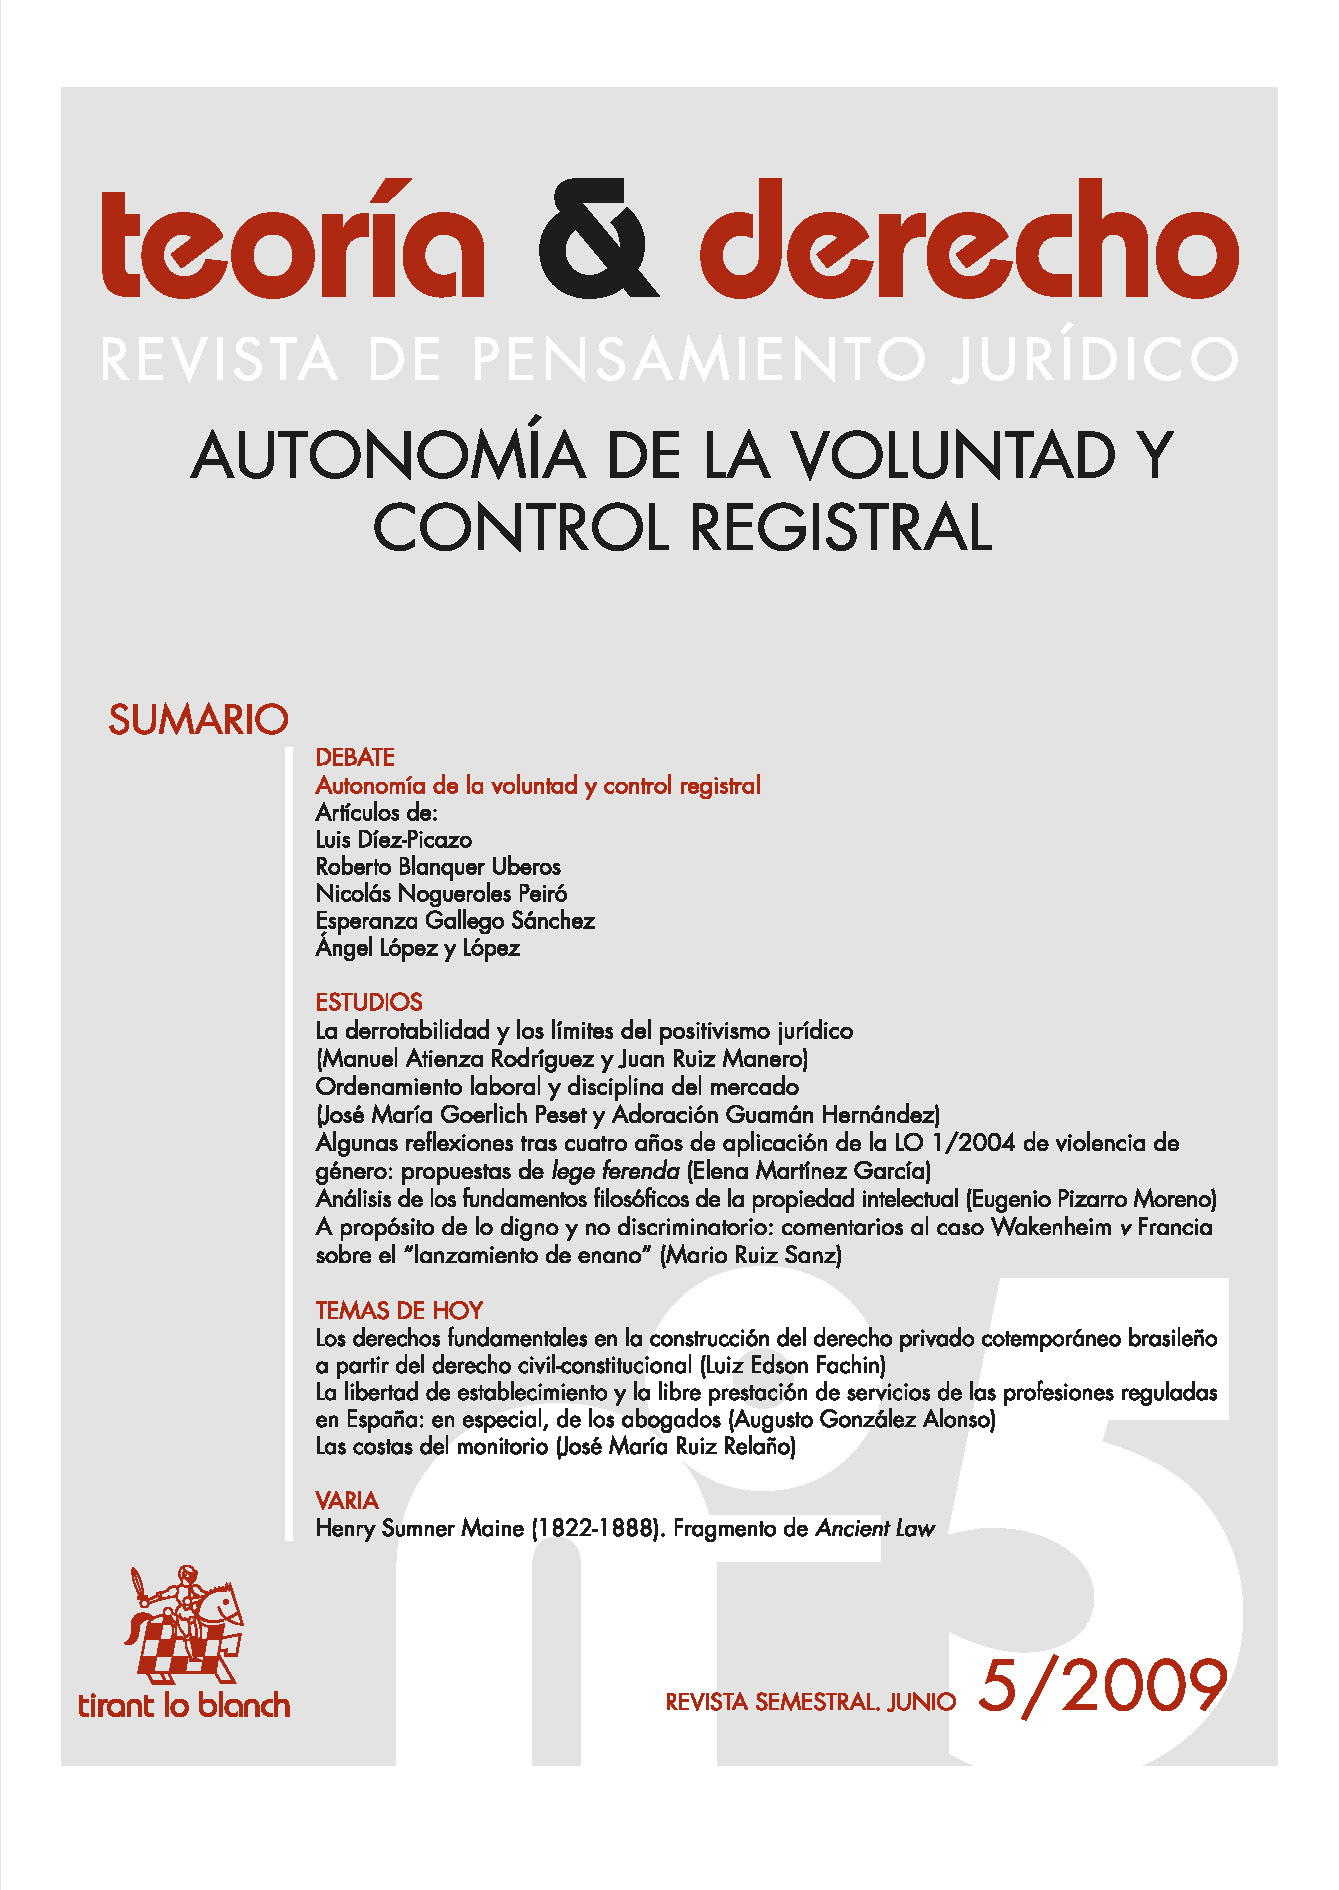 					View No. 5 (2009): Autonomy of the will and registry control
				